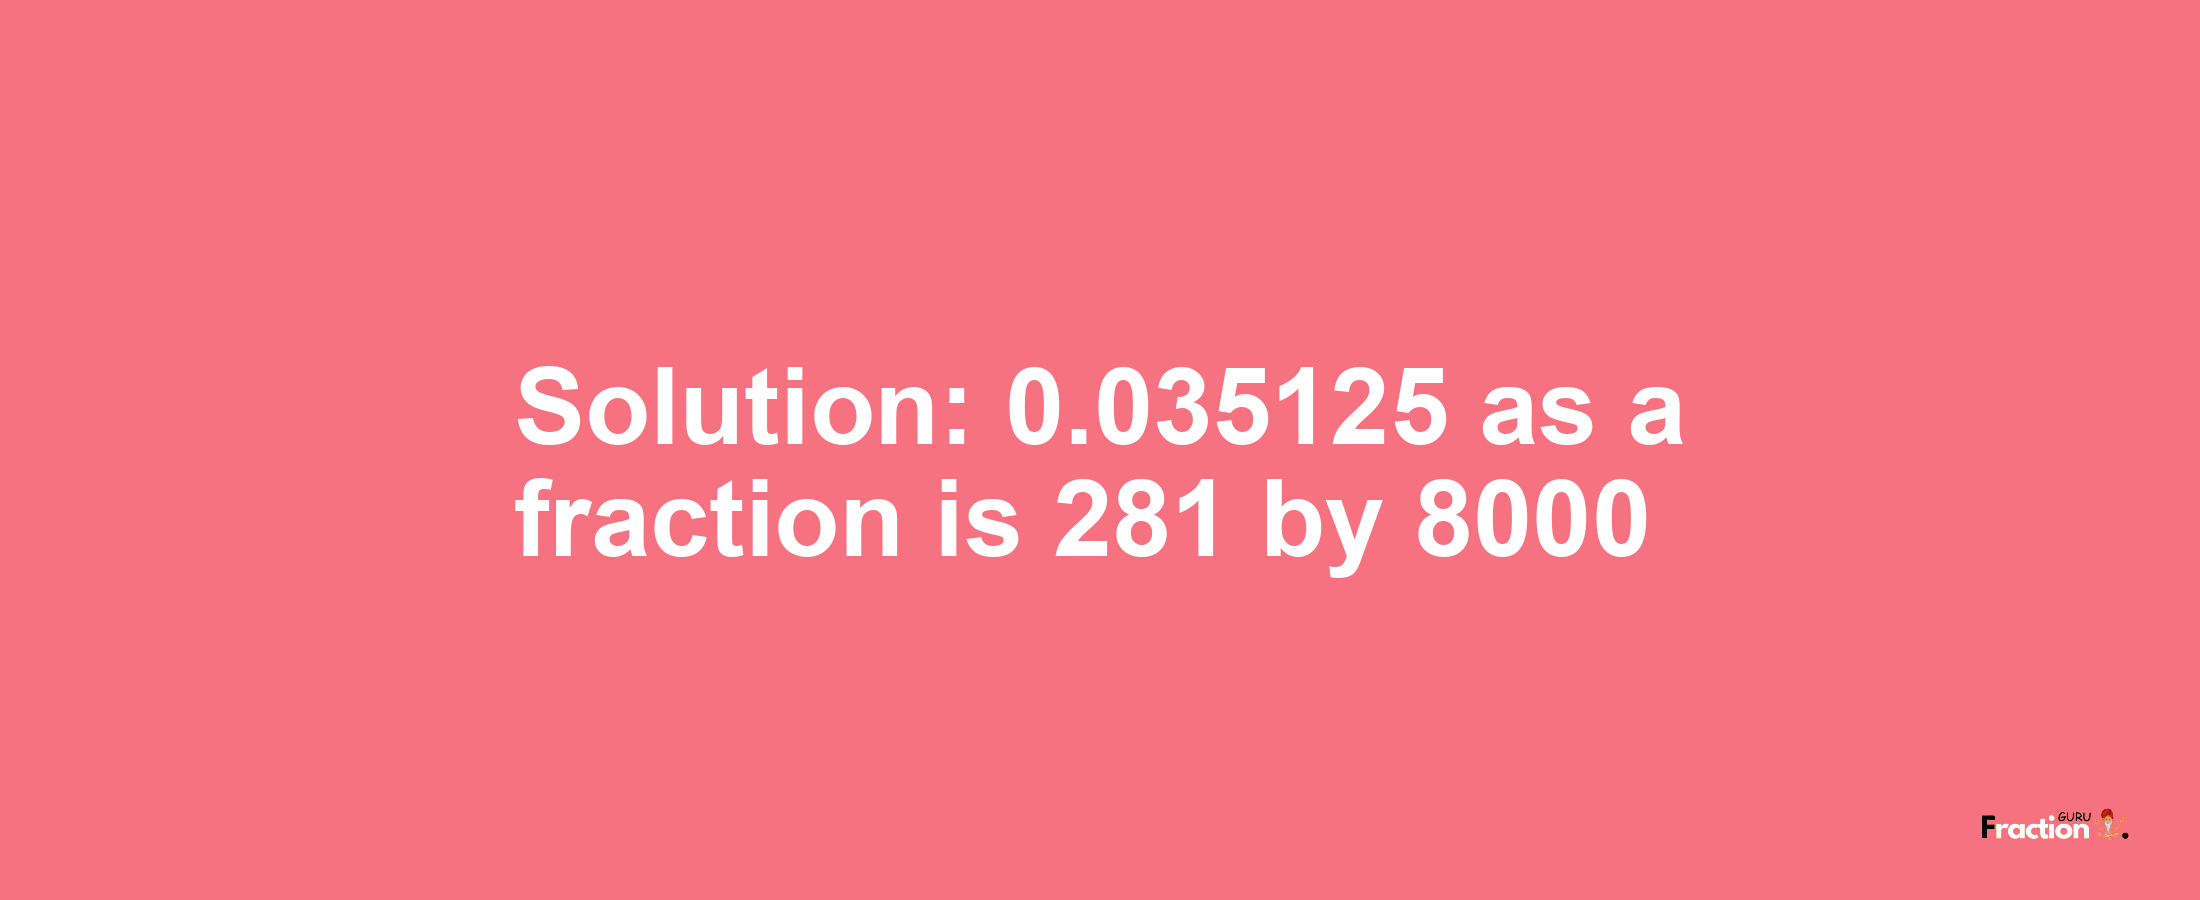 Solution:0.035125 as a fraction is 281/8000